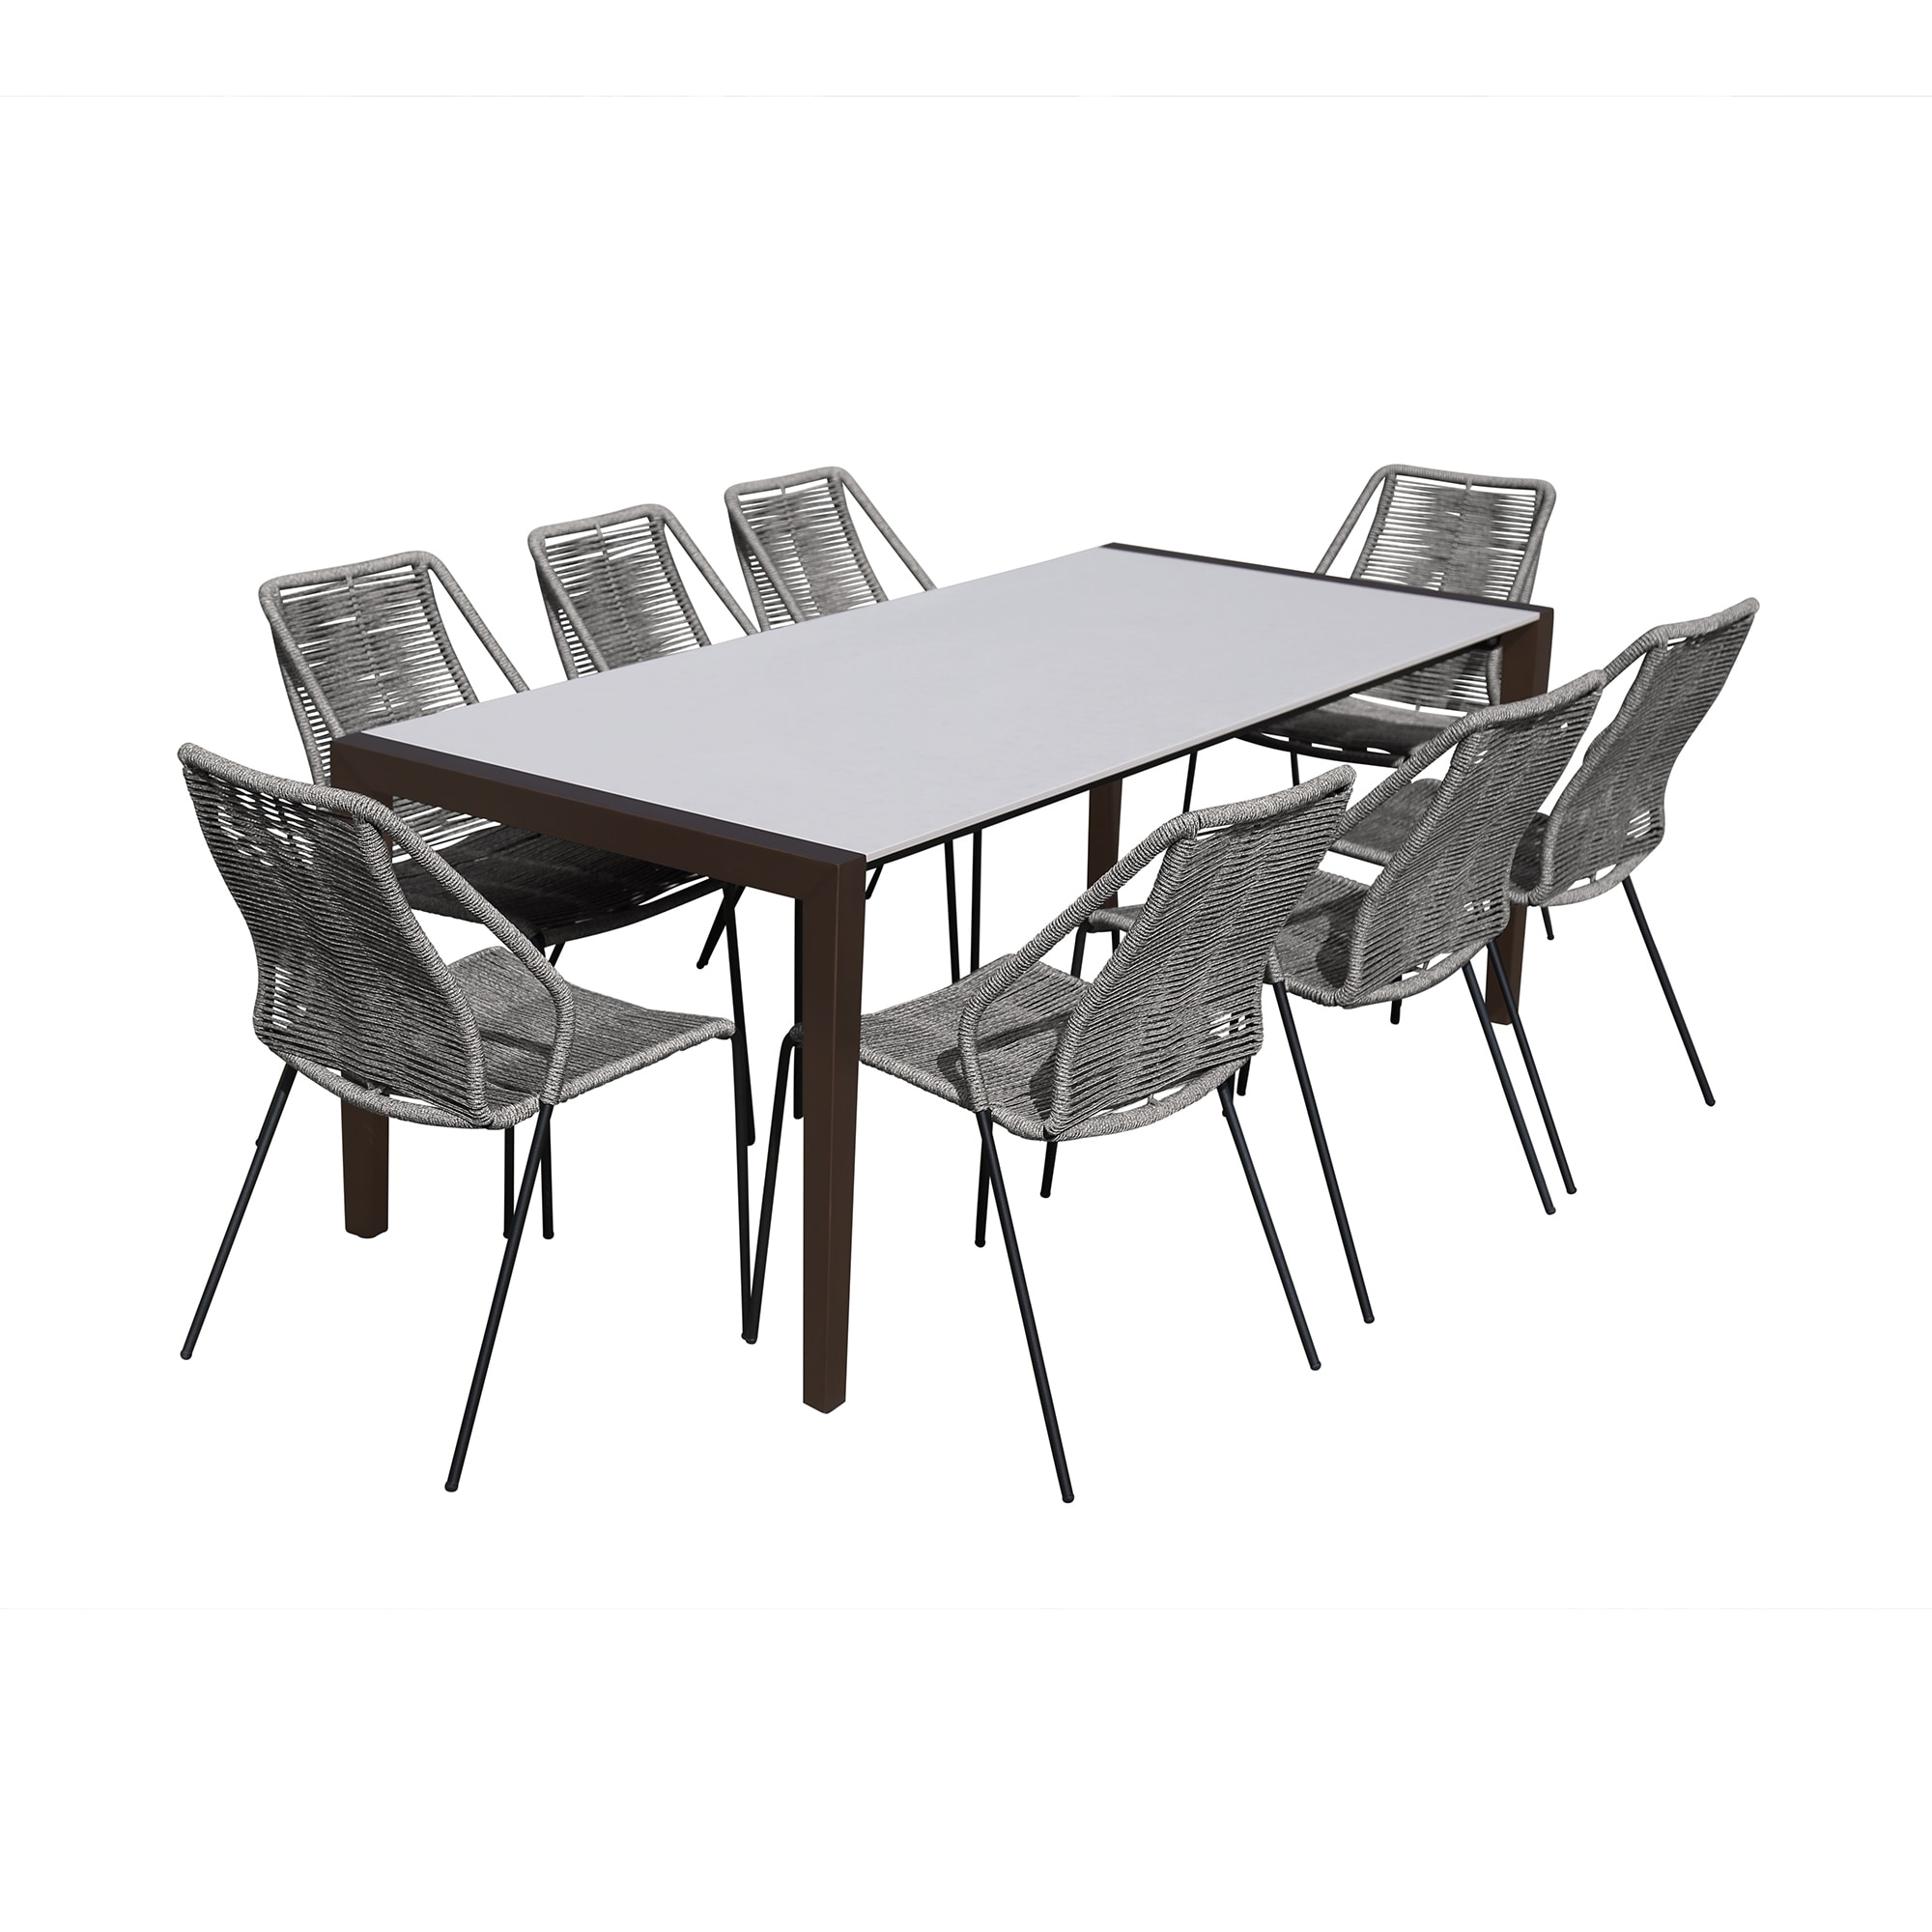 Fineline And Clip Indoor Outdoor 9 Piece Dining Set In Dark Eucalyptus Wood With Superstone And Rope